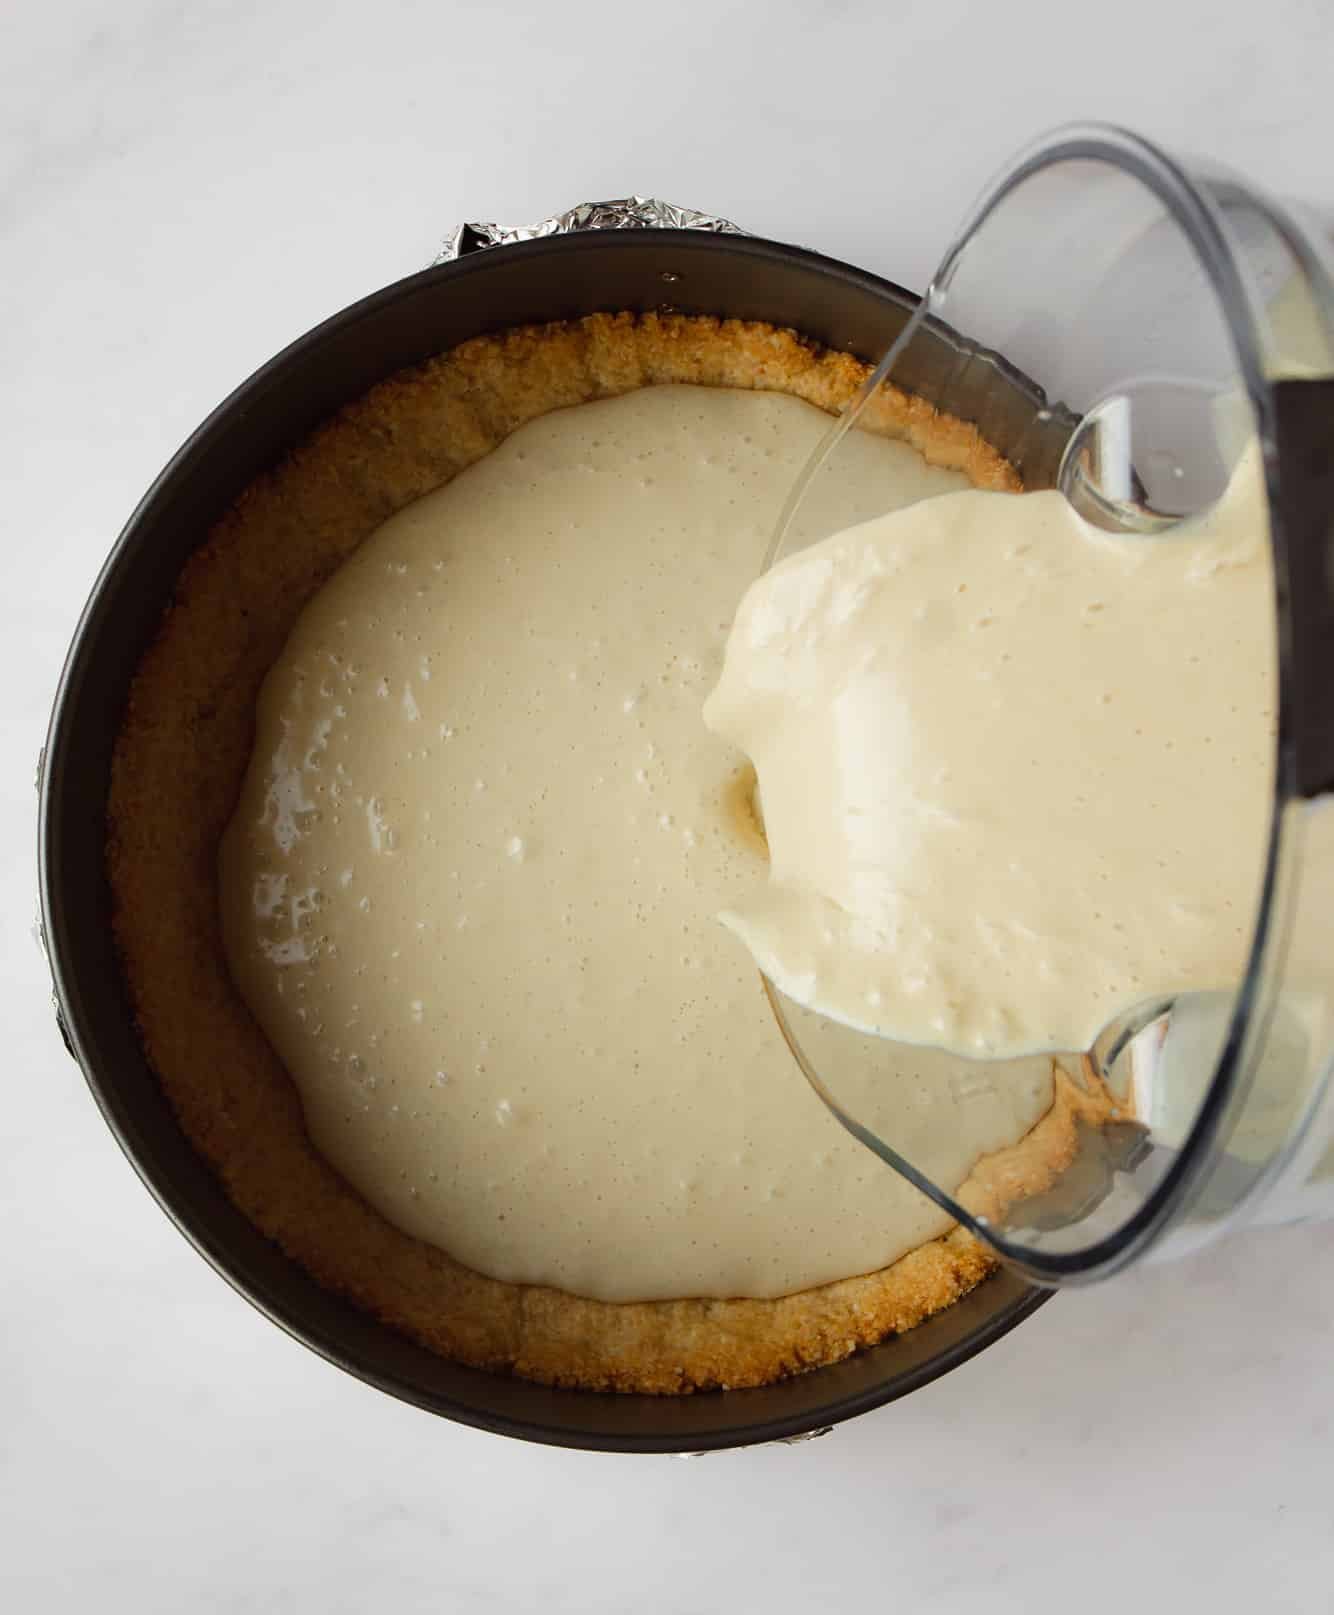 Pour a white sauce over a baked cheesecake crust.